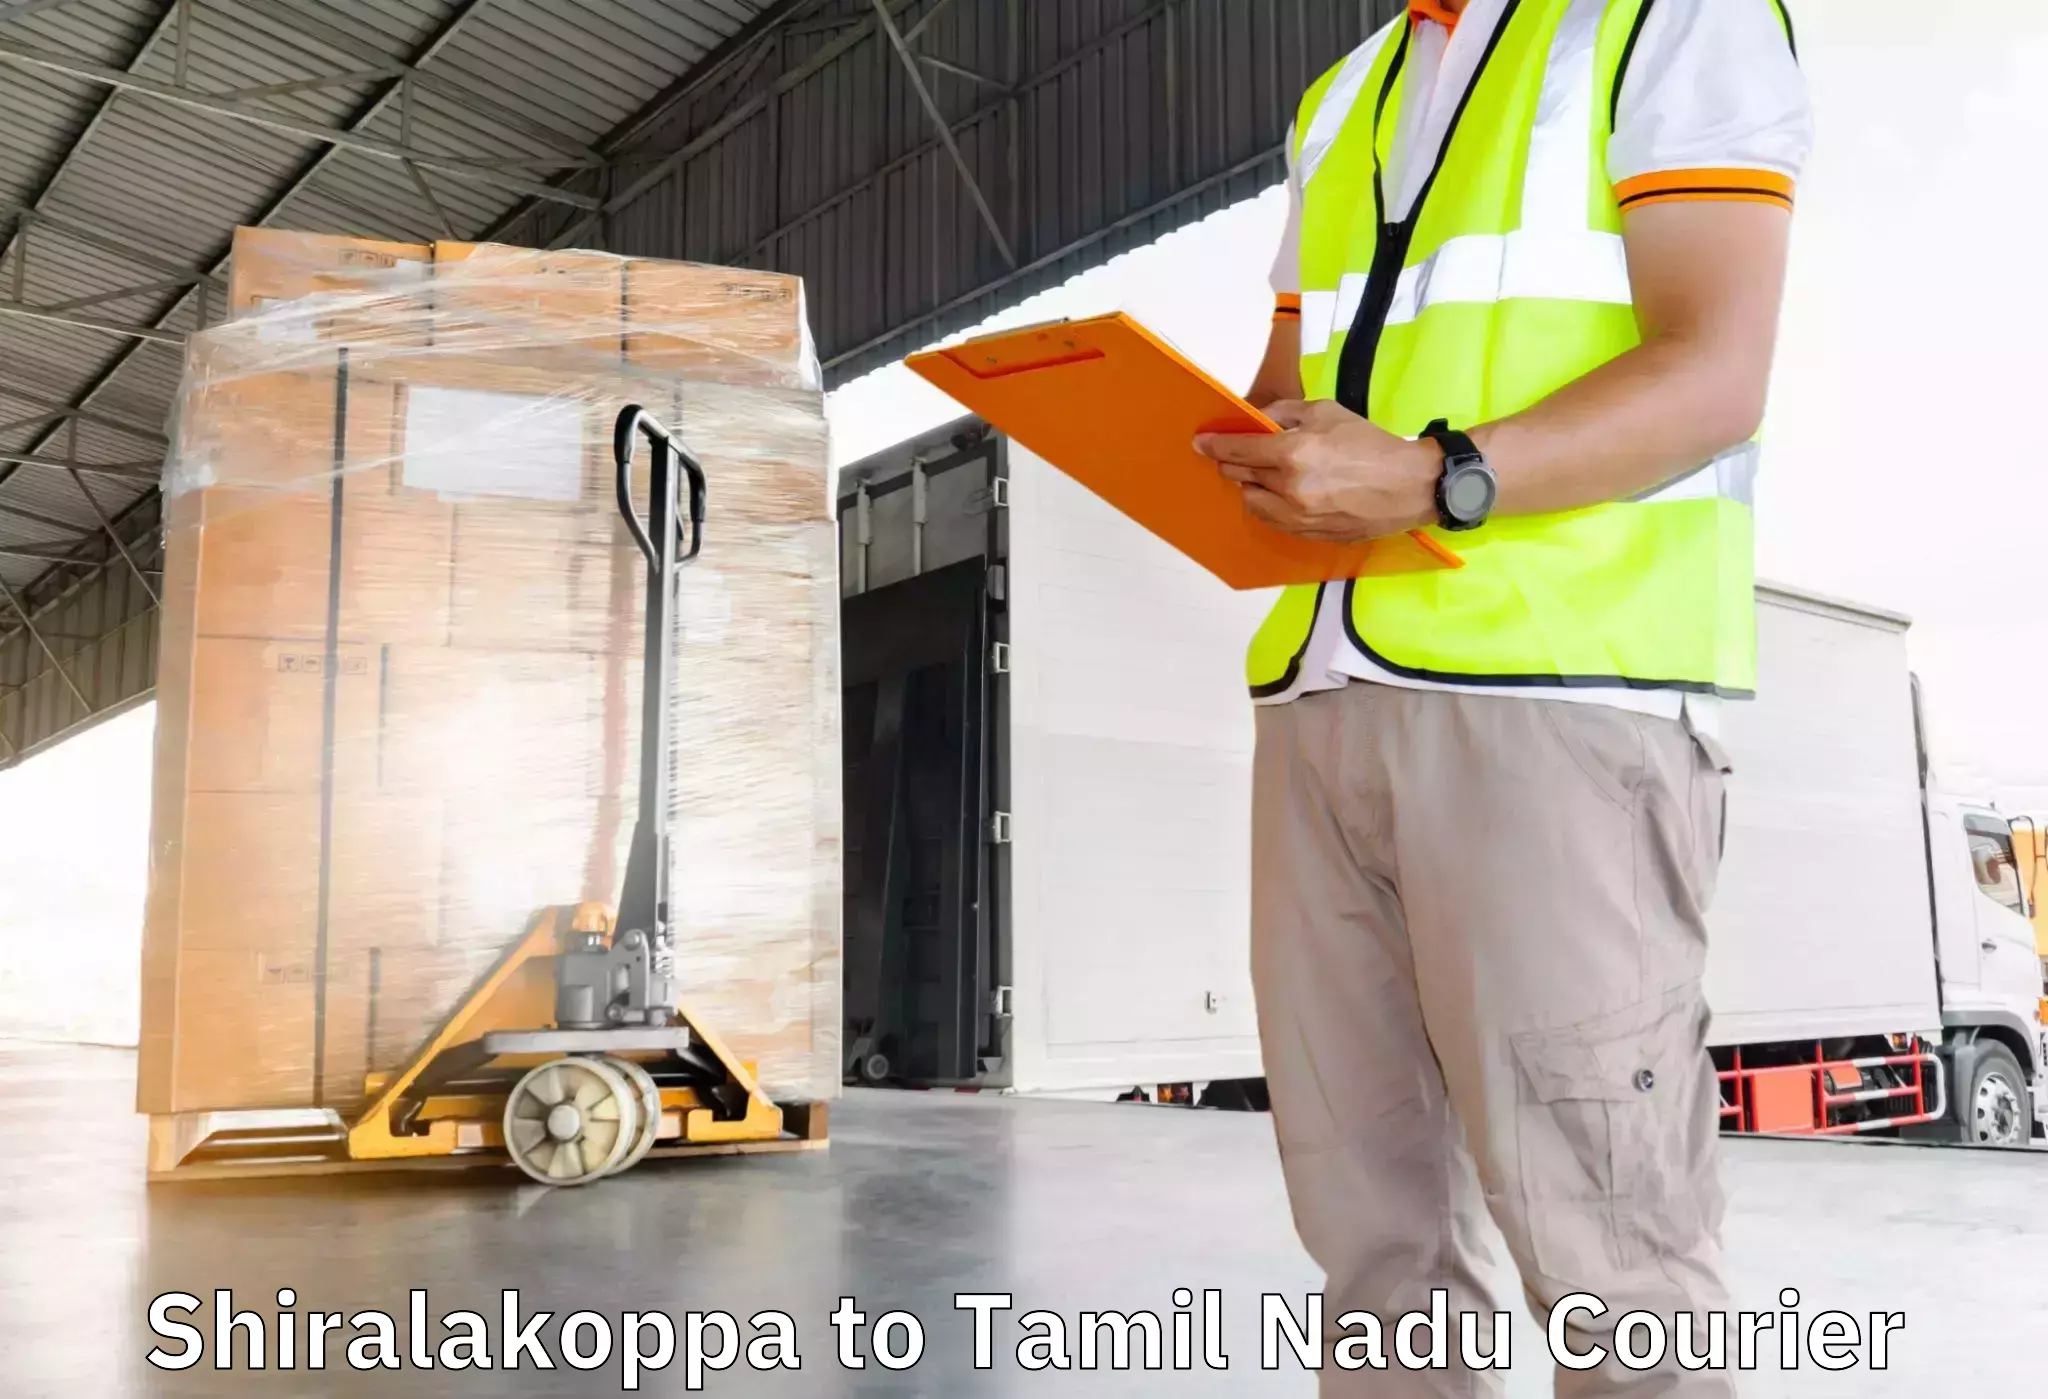 Specialized moving company Shiralakoppa to Tamil Nadu Agricultural University Coimbatore